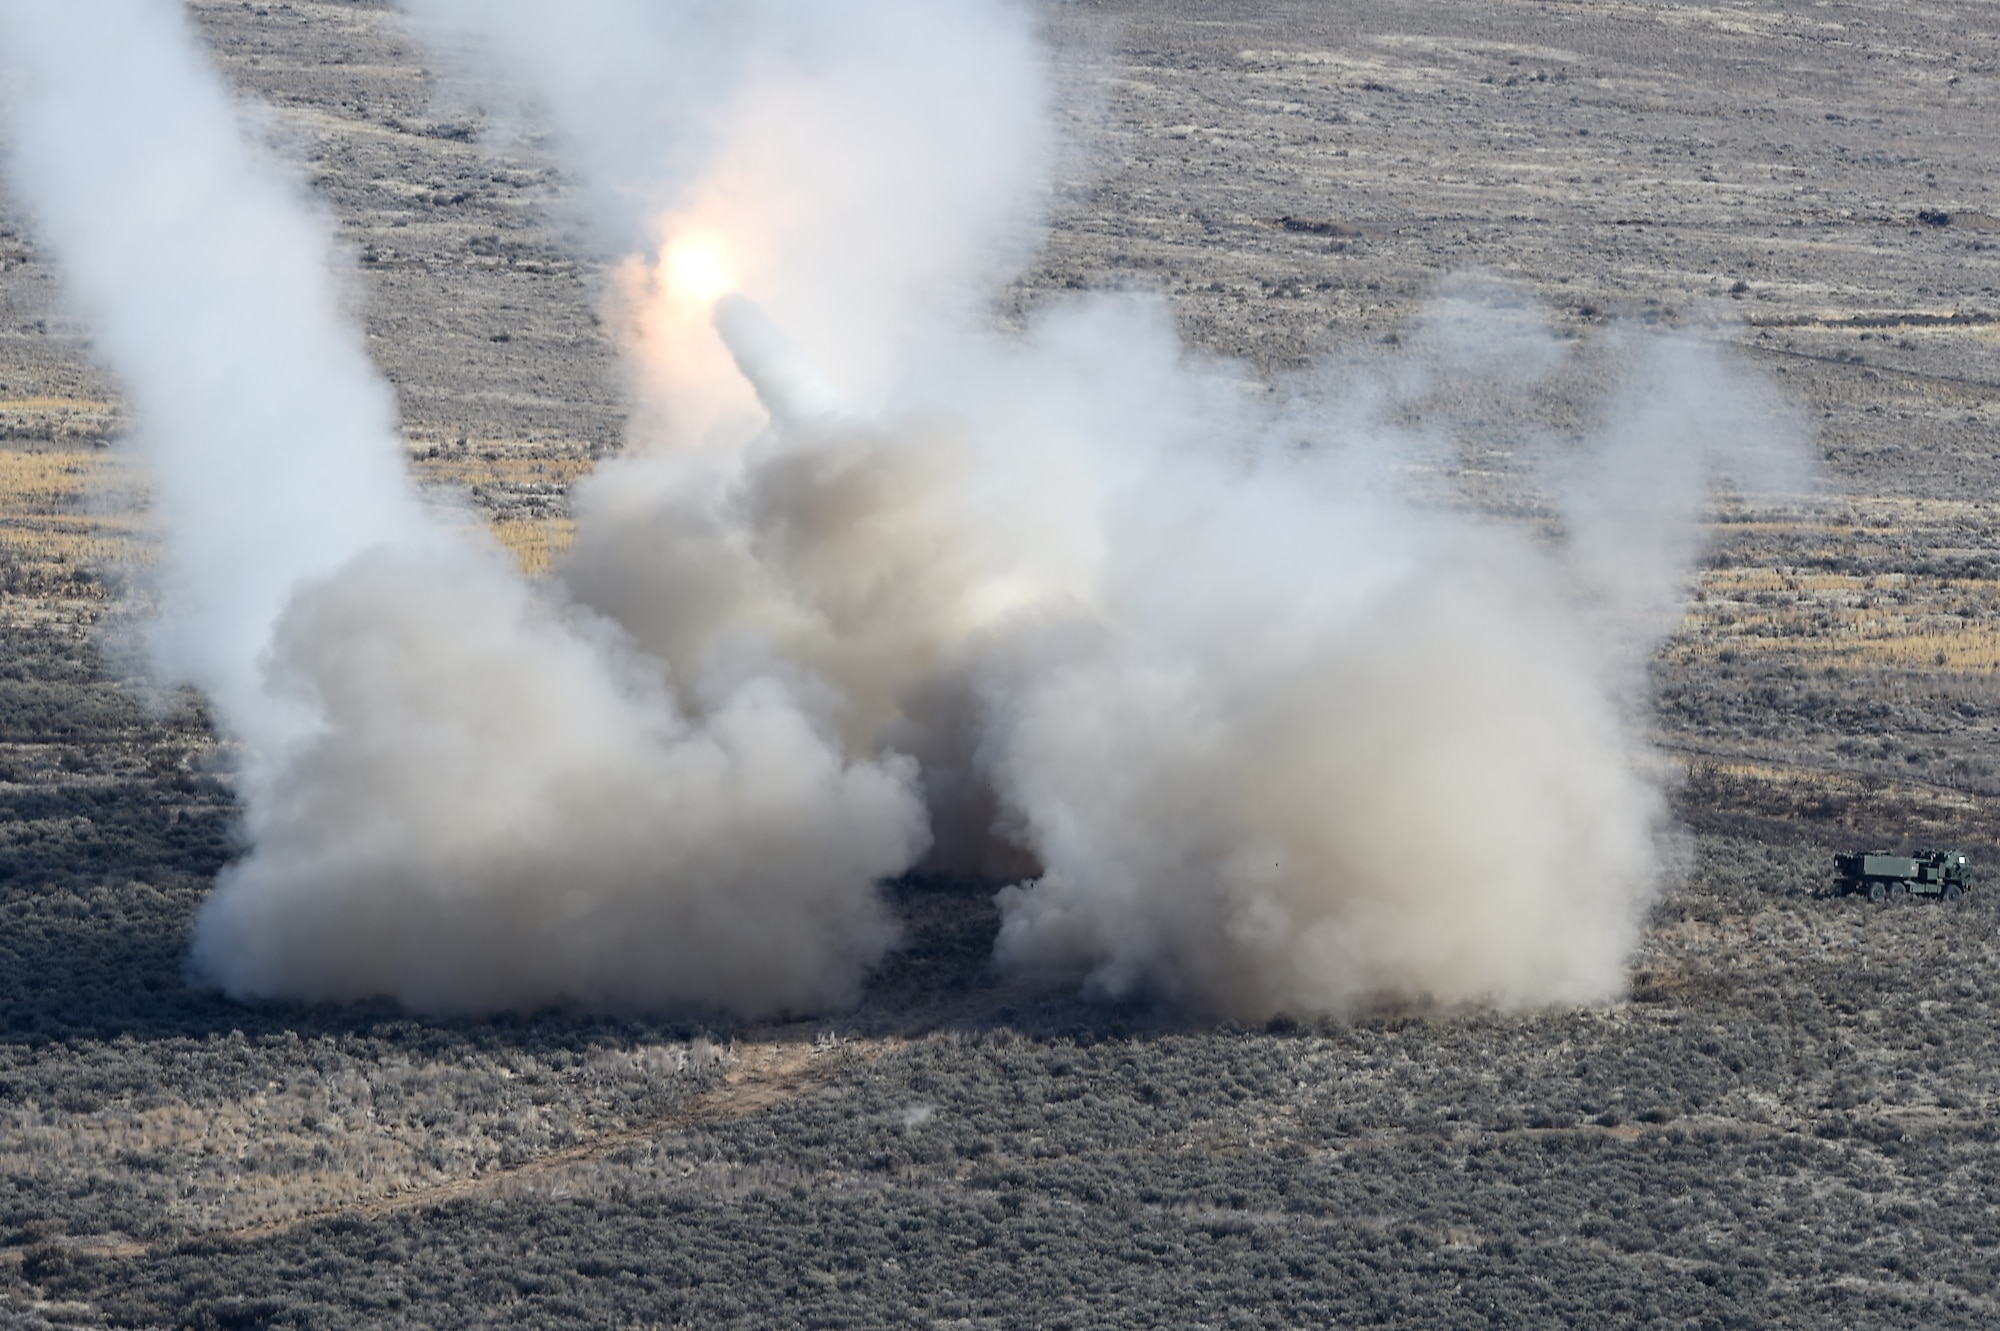 U.S. Army High Mobility Artillery Rocket System (HIMARS) vehicles fire rocket artillery as part of a training exercise and to celebrate the re-opening of the Selah Airstrip on Yakima Training Center, Washington, Novemeber 15, 2018.